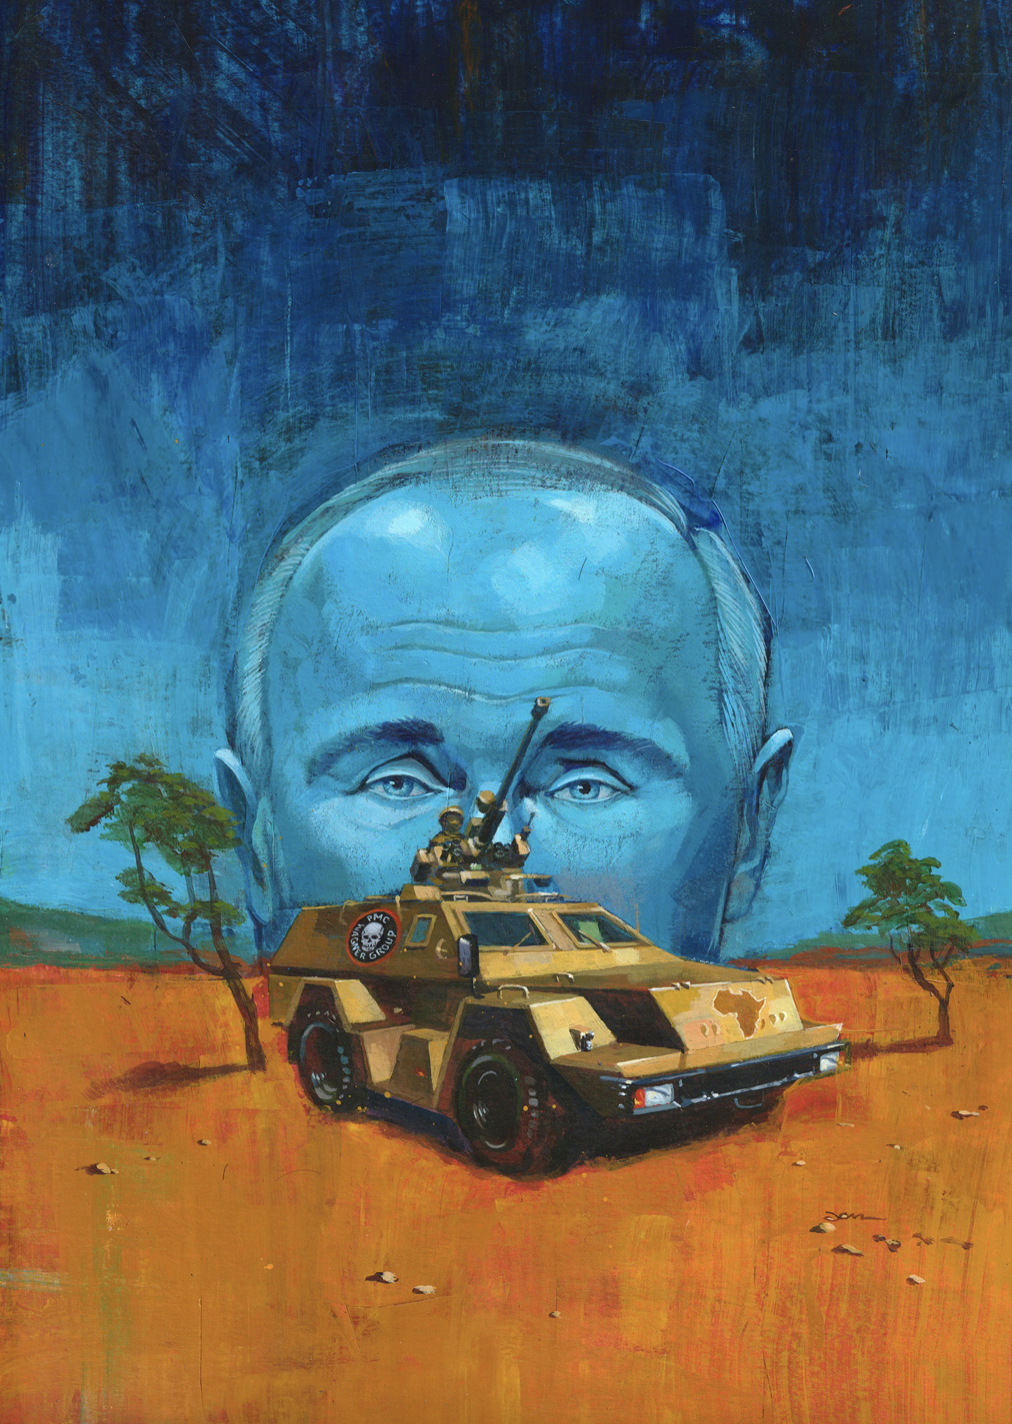 A painting of a person with a car in front of him

Description automatically generated with low confidence